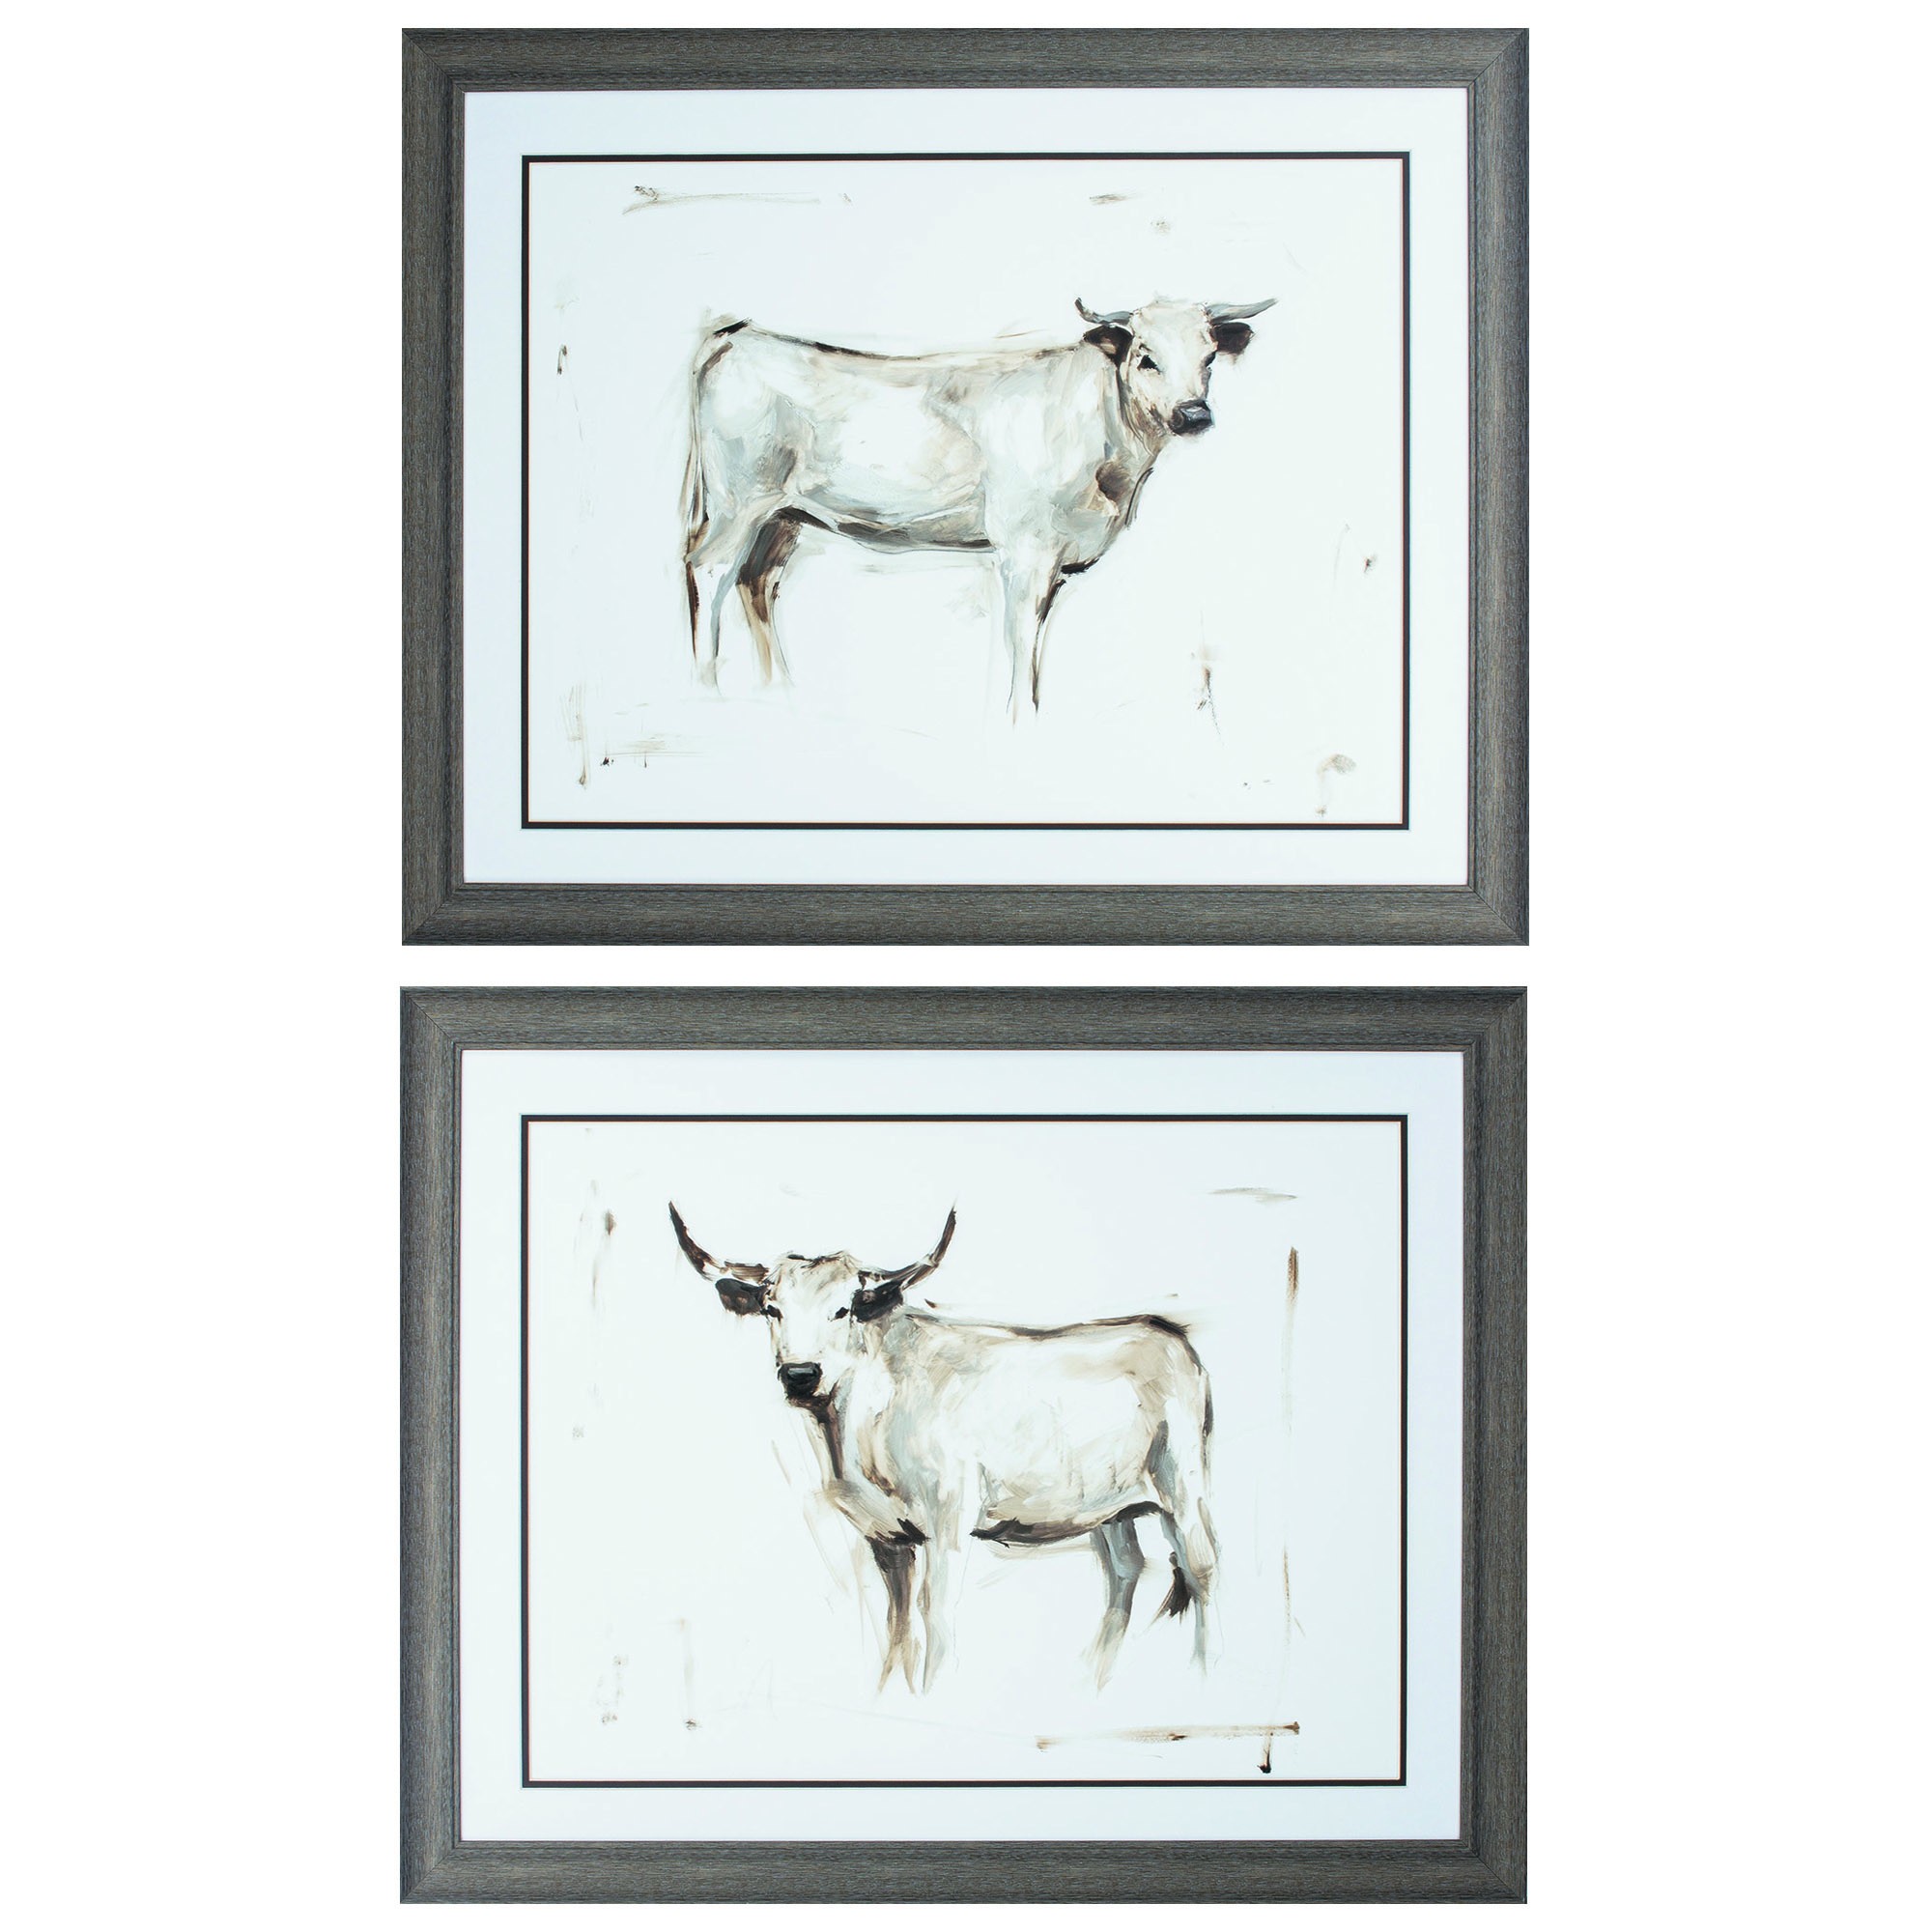 31" X 25" Distressed Wood Toned Frame White Cattle (Set of 2)